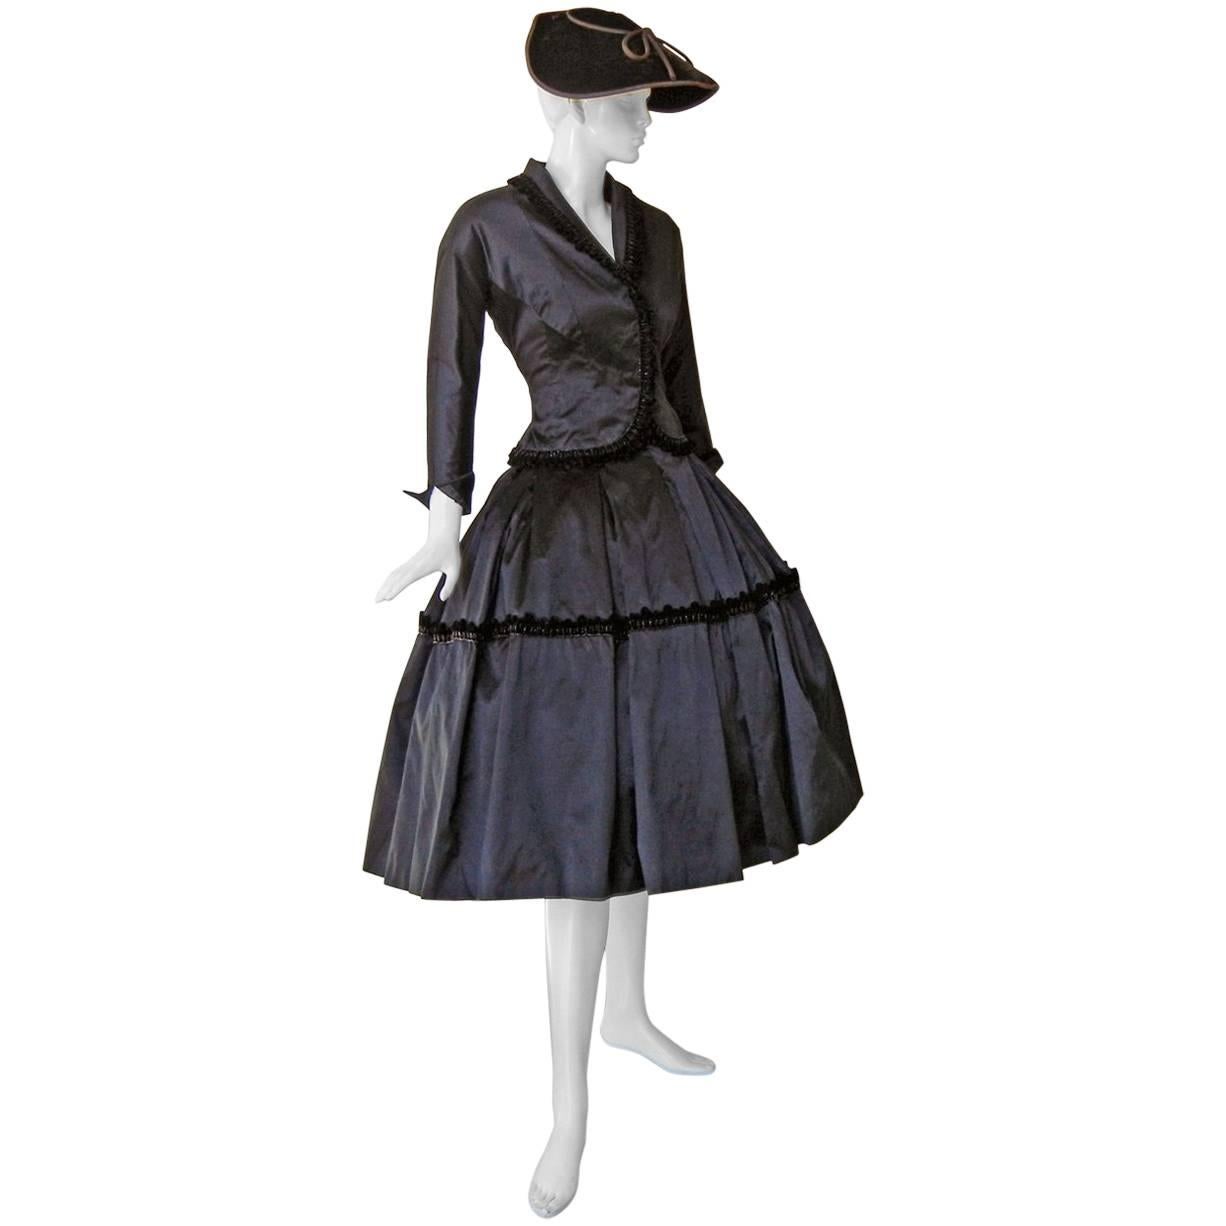  1954 Christian Dior Haute Couture 'Lily of the Valley' Satin Evening Dress Suit